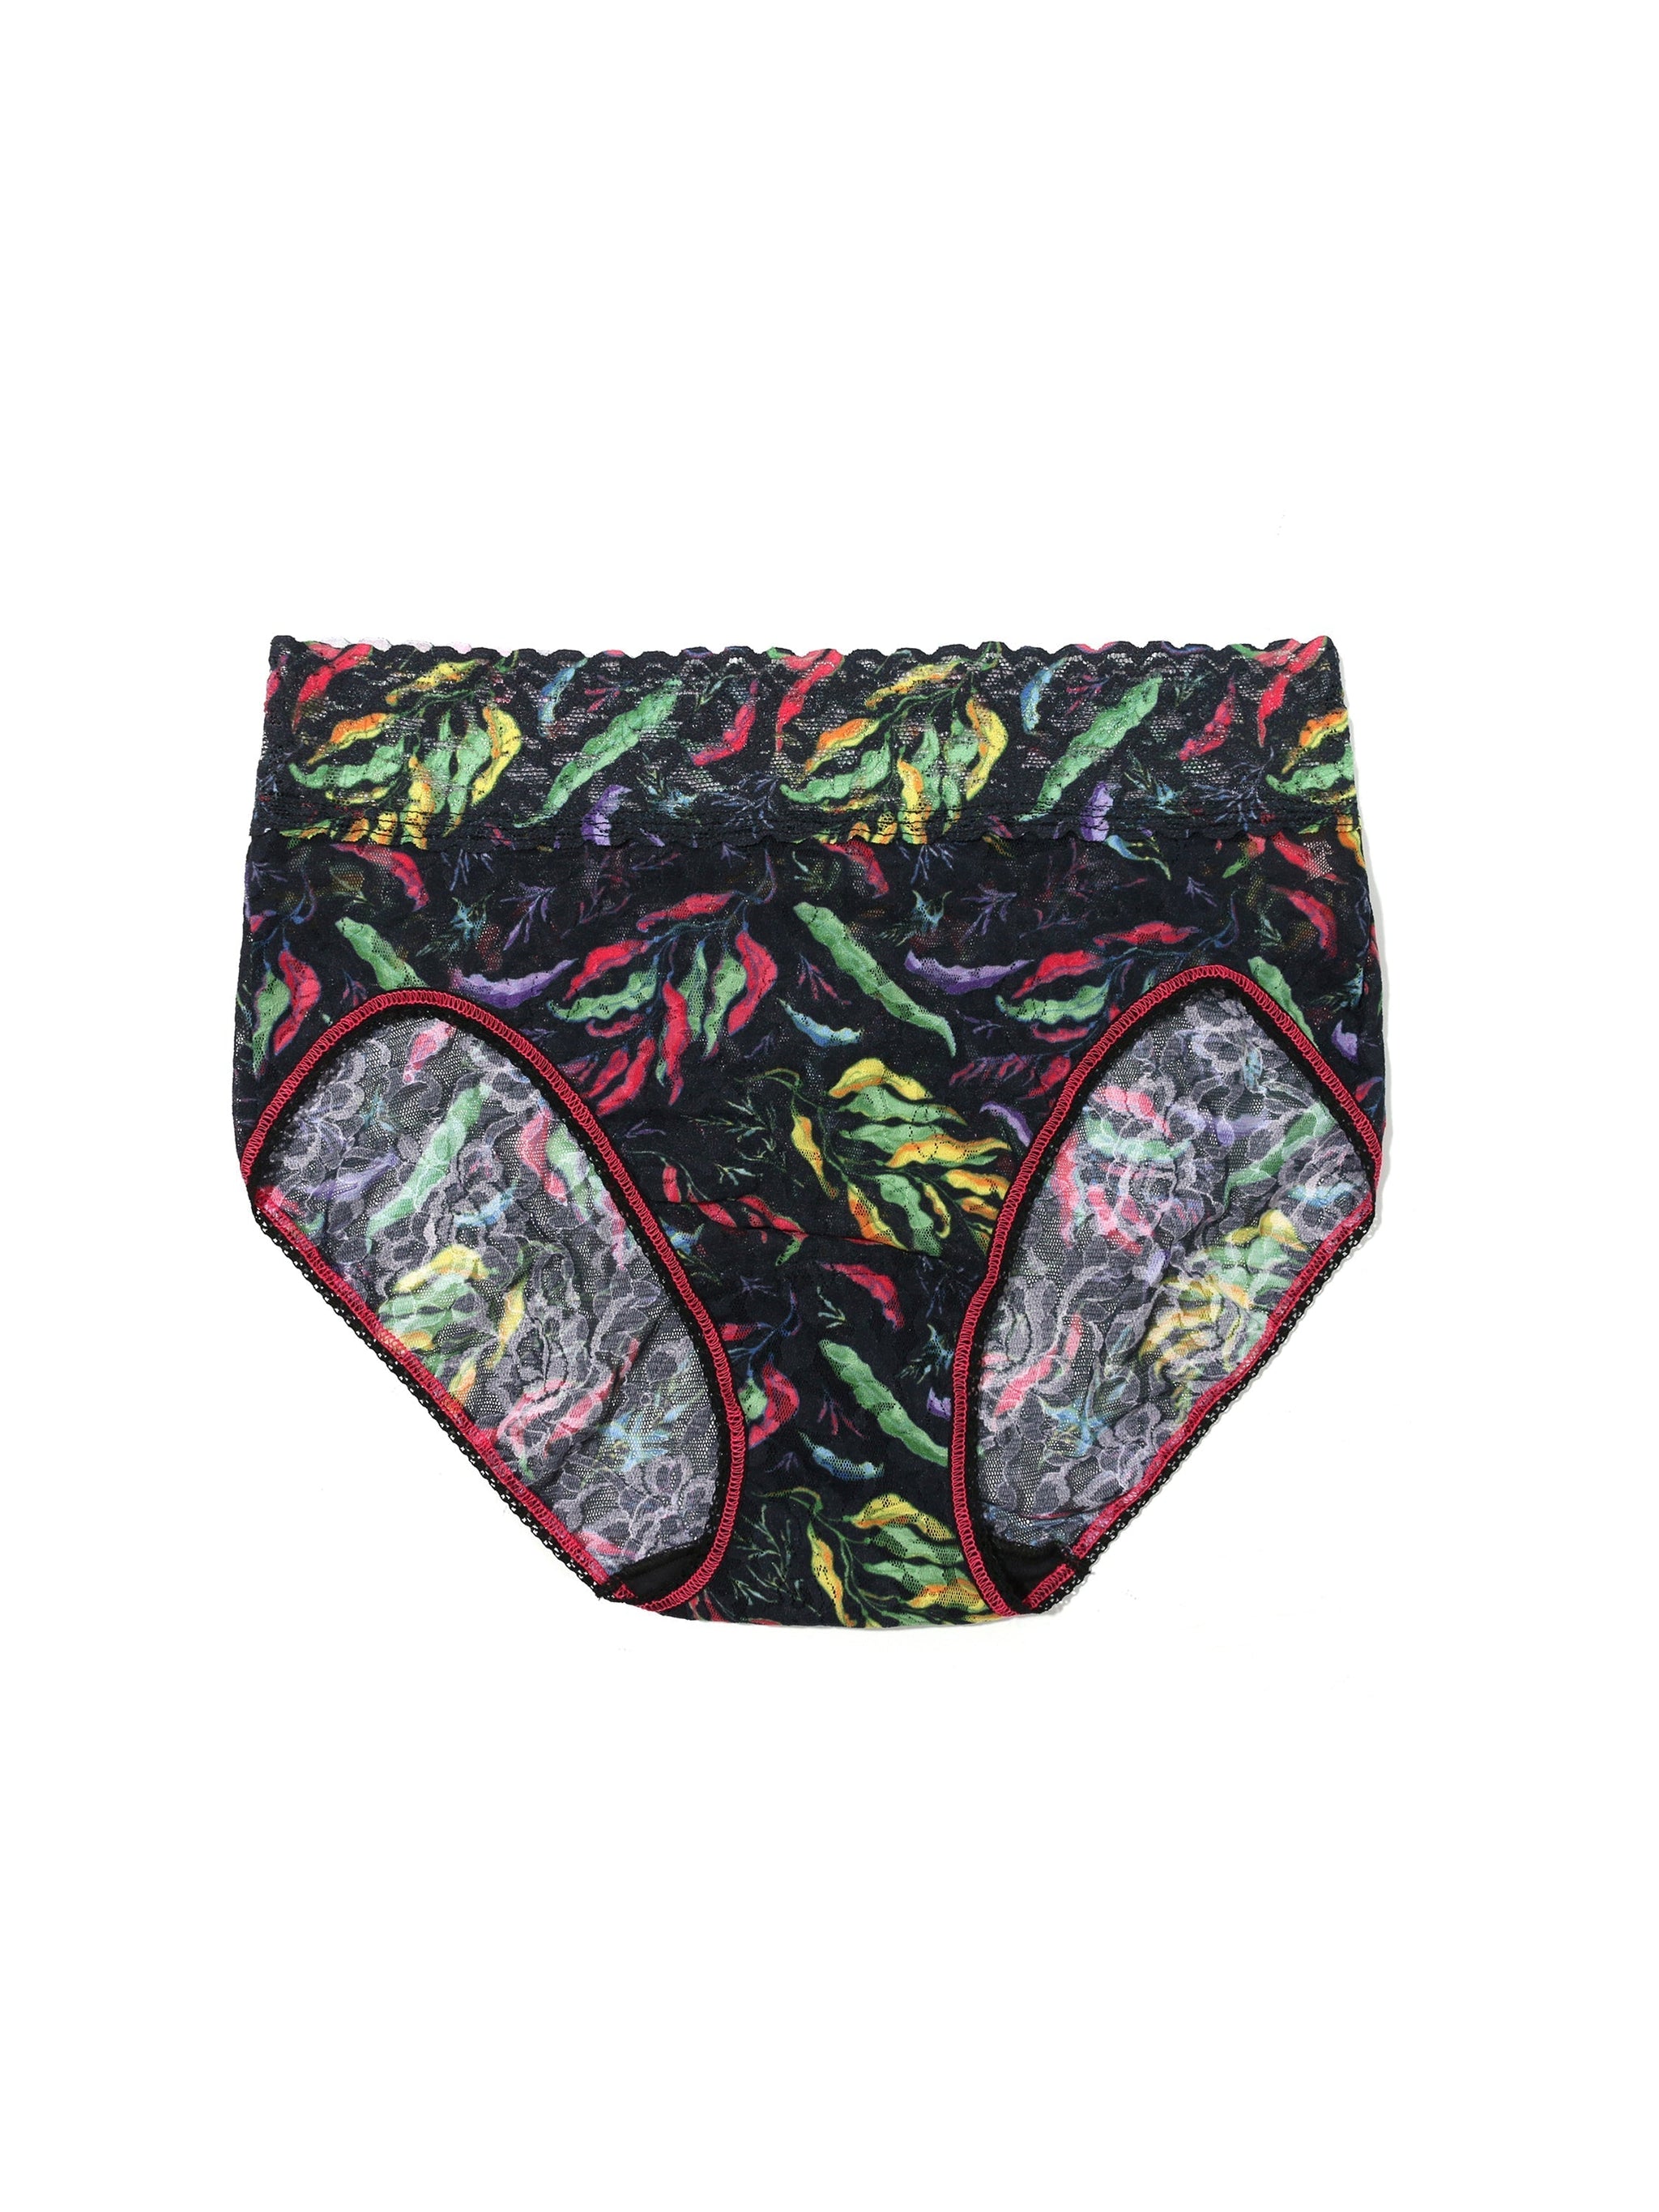 Printed Signature Lace French Brief Floating Sale